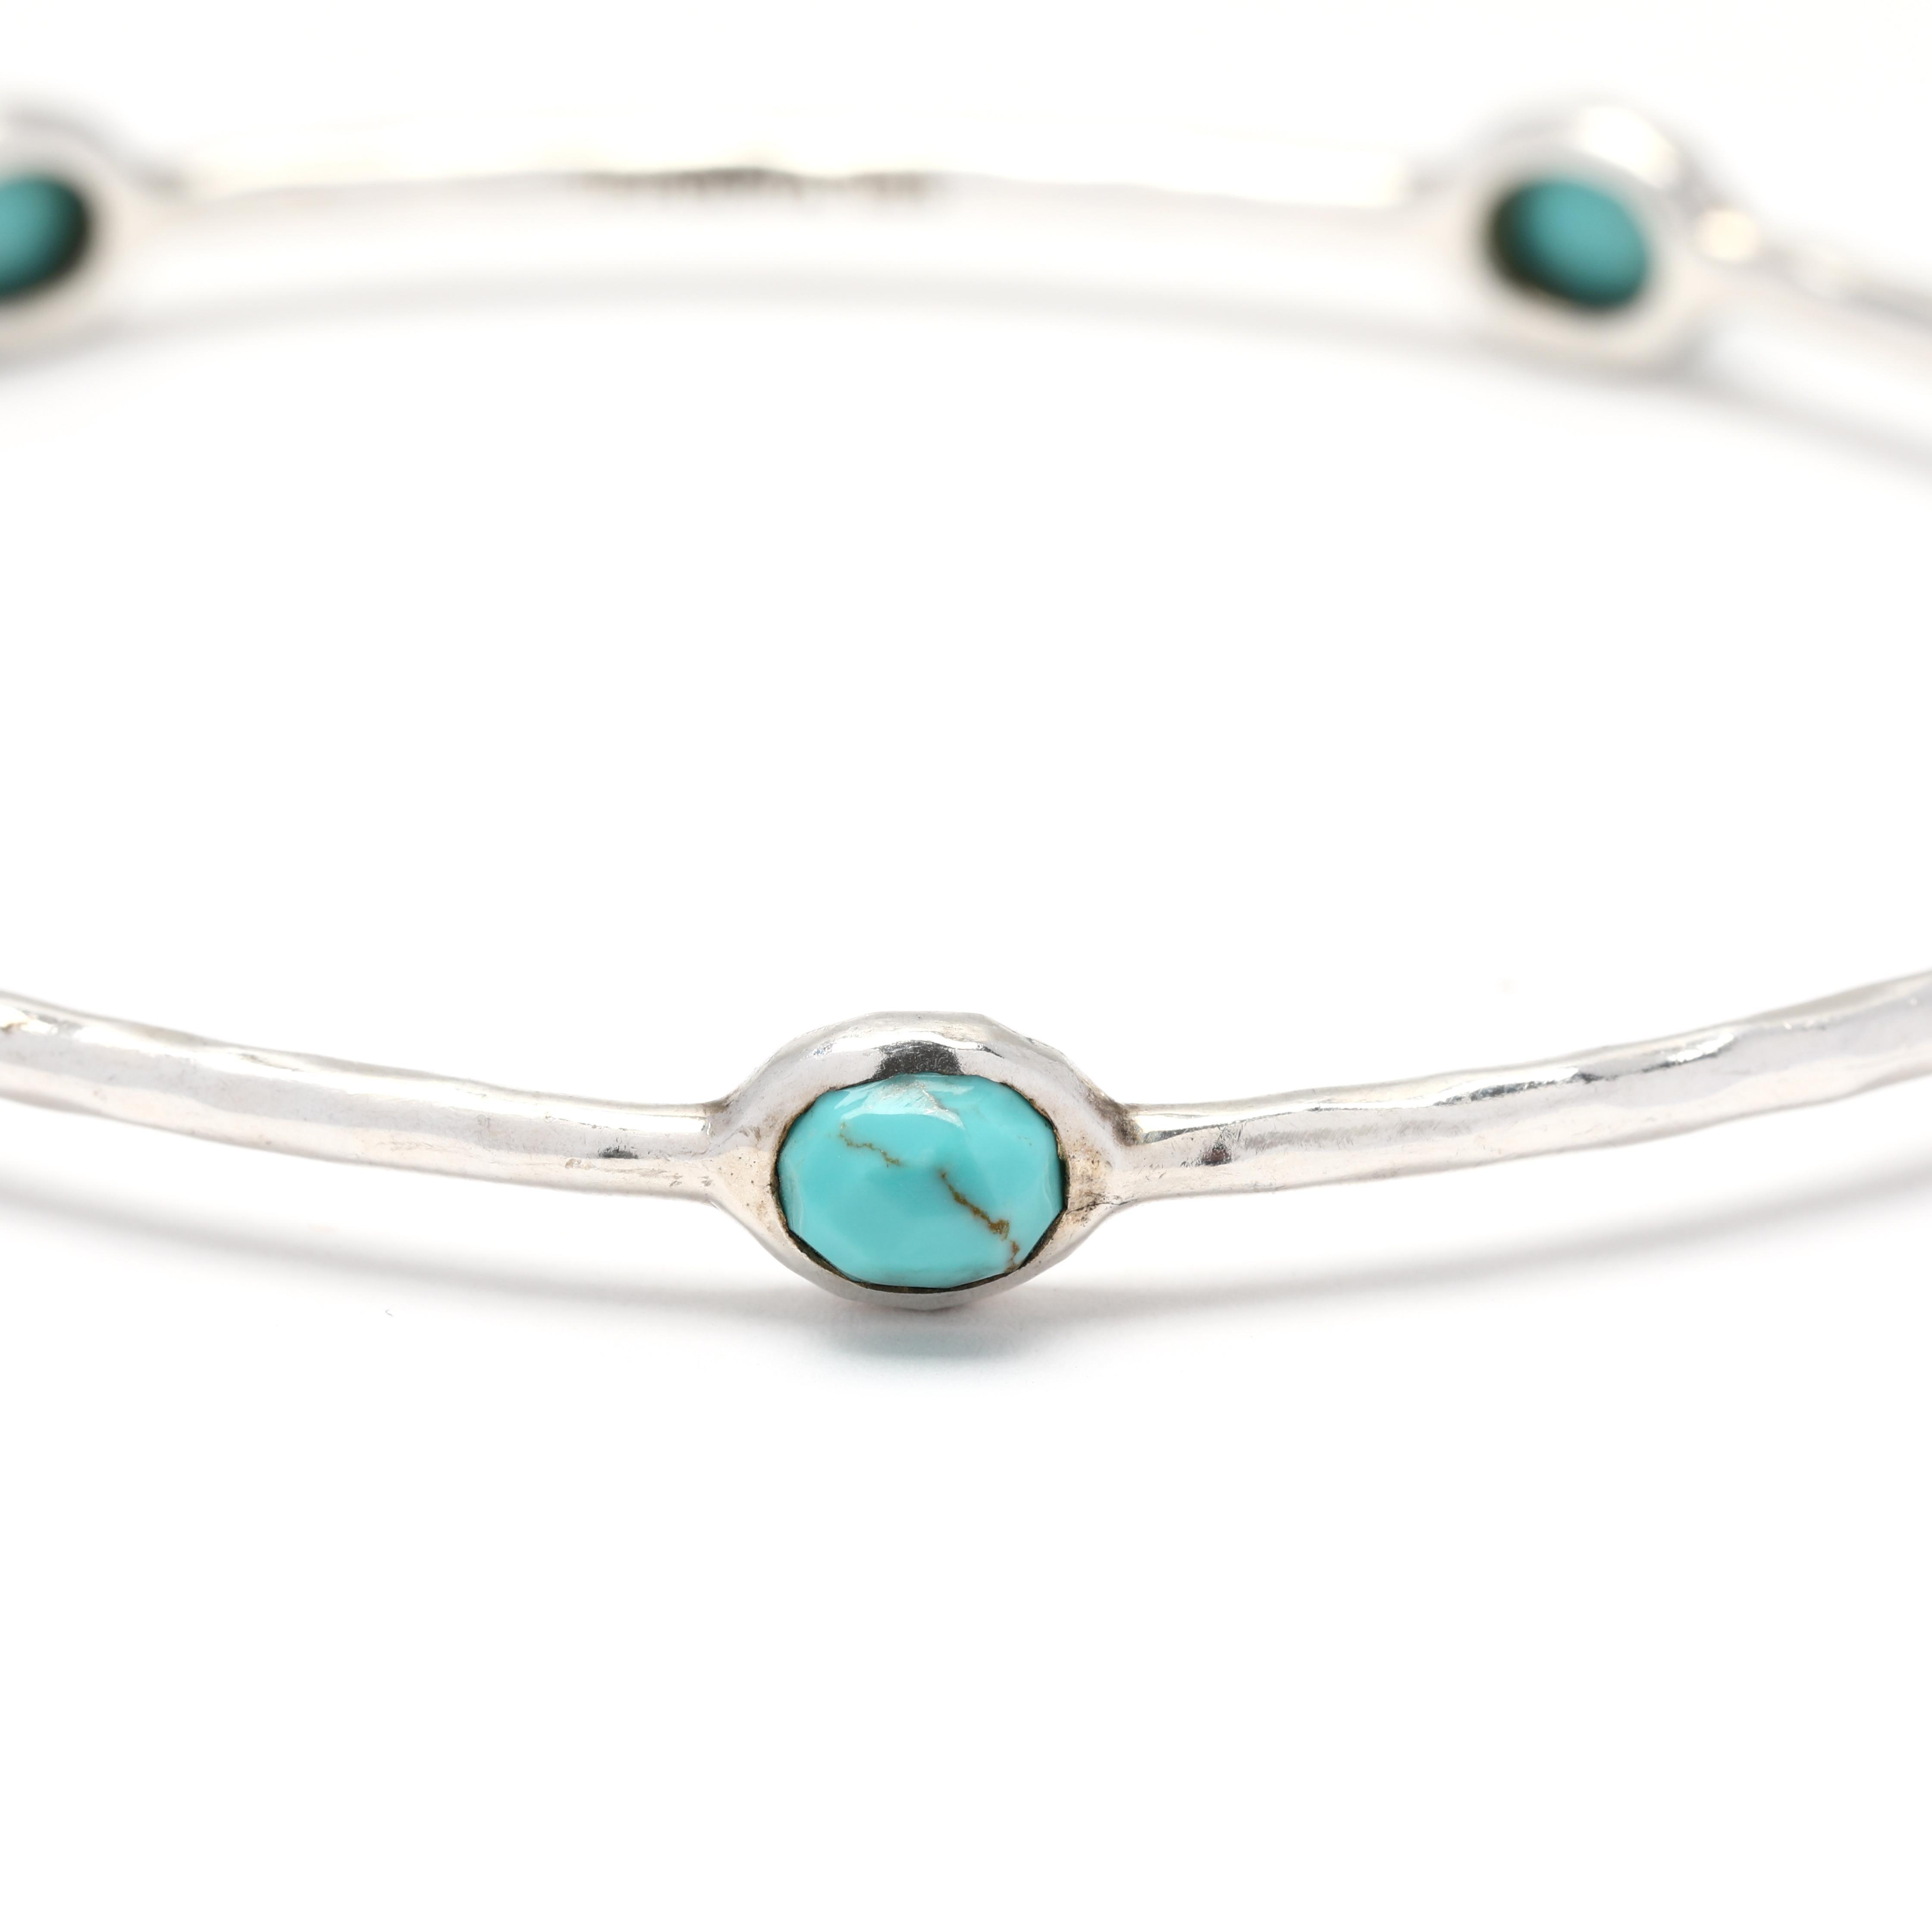 This Ippolita Rock Candy 5 Stone Turquoise Bangle Bracelet is a beautiful and simple piece of jewelry made of high-quality sterling silver. The bracelet features five stunning turquoise stones that add a touch of color and natural beauty. With a